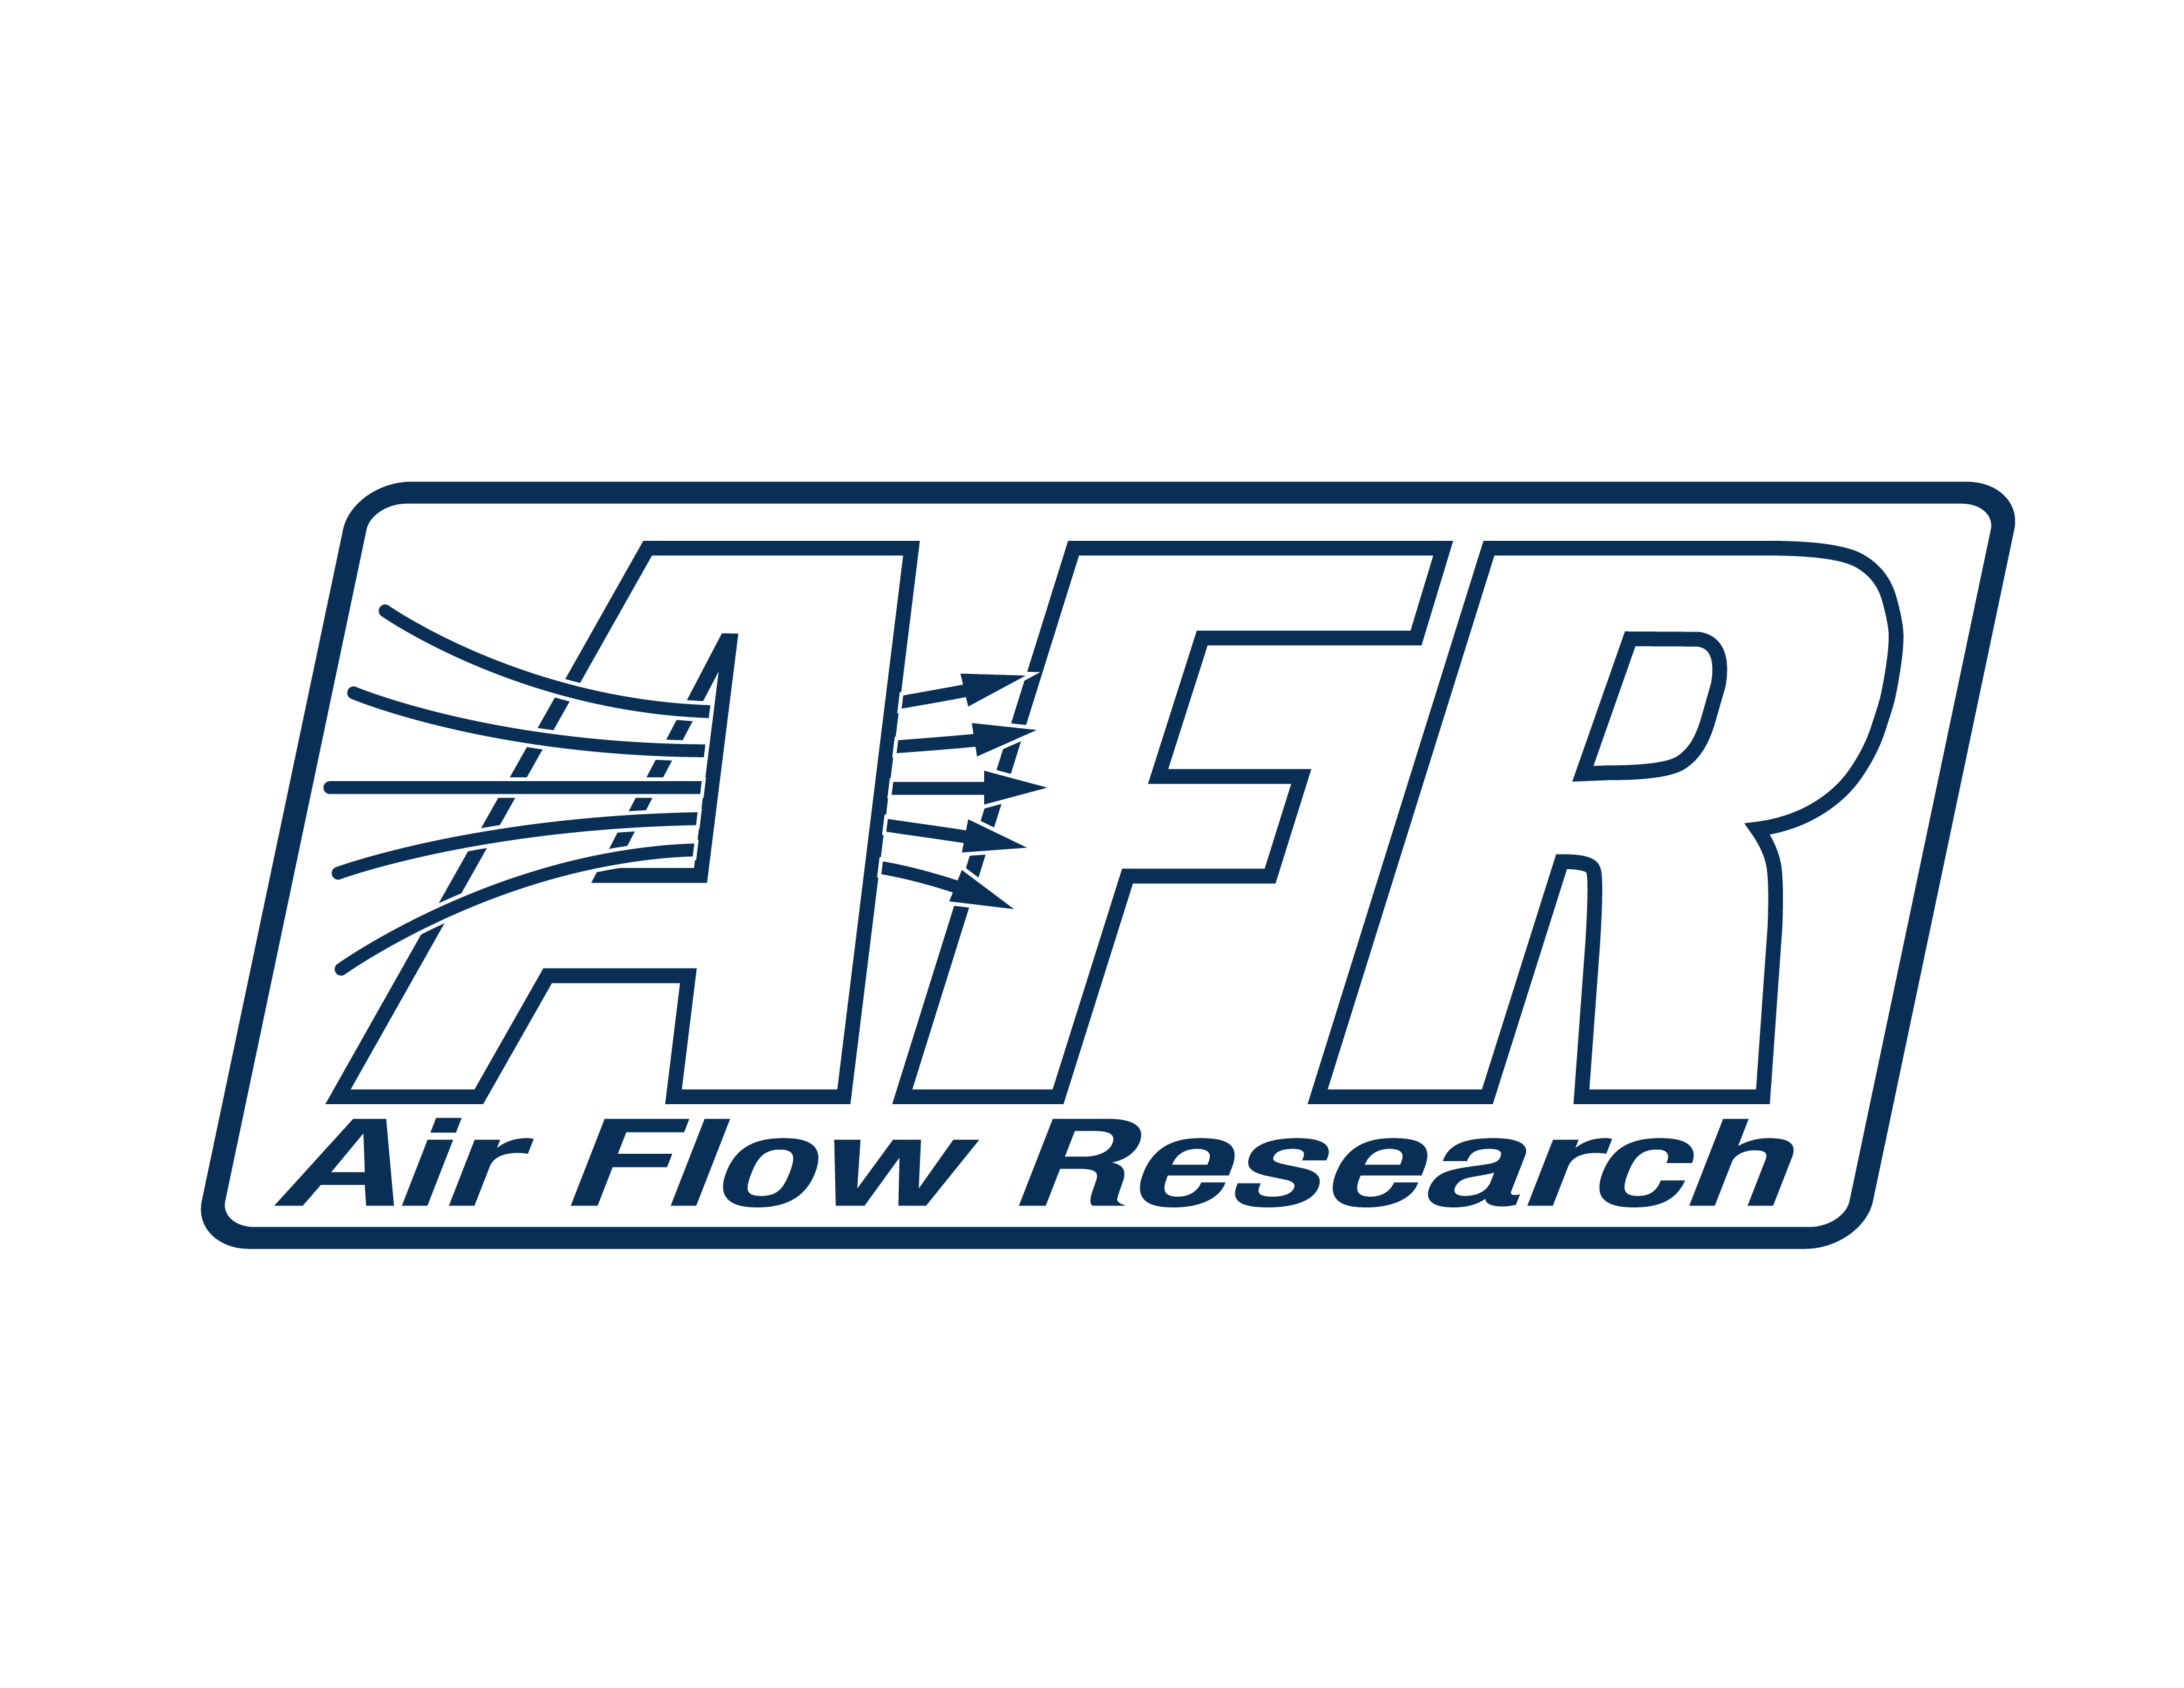 Client of the midnight oil group - Air Flow Research